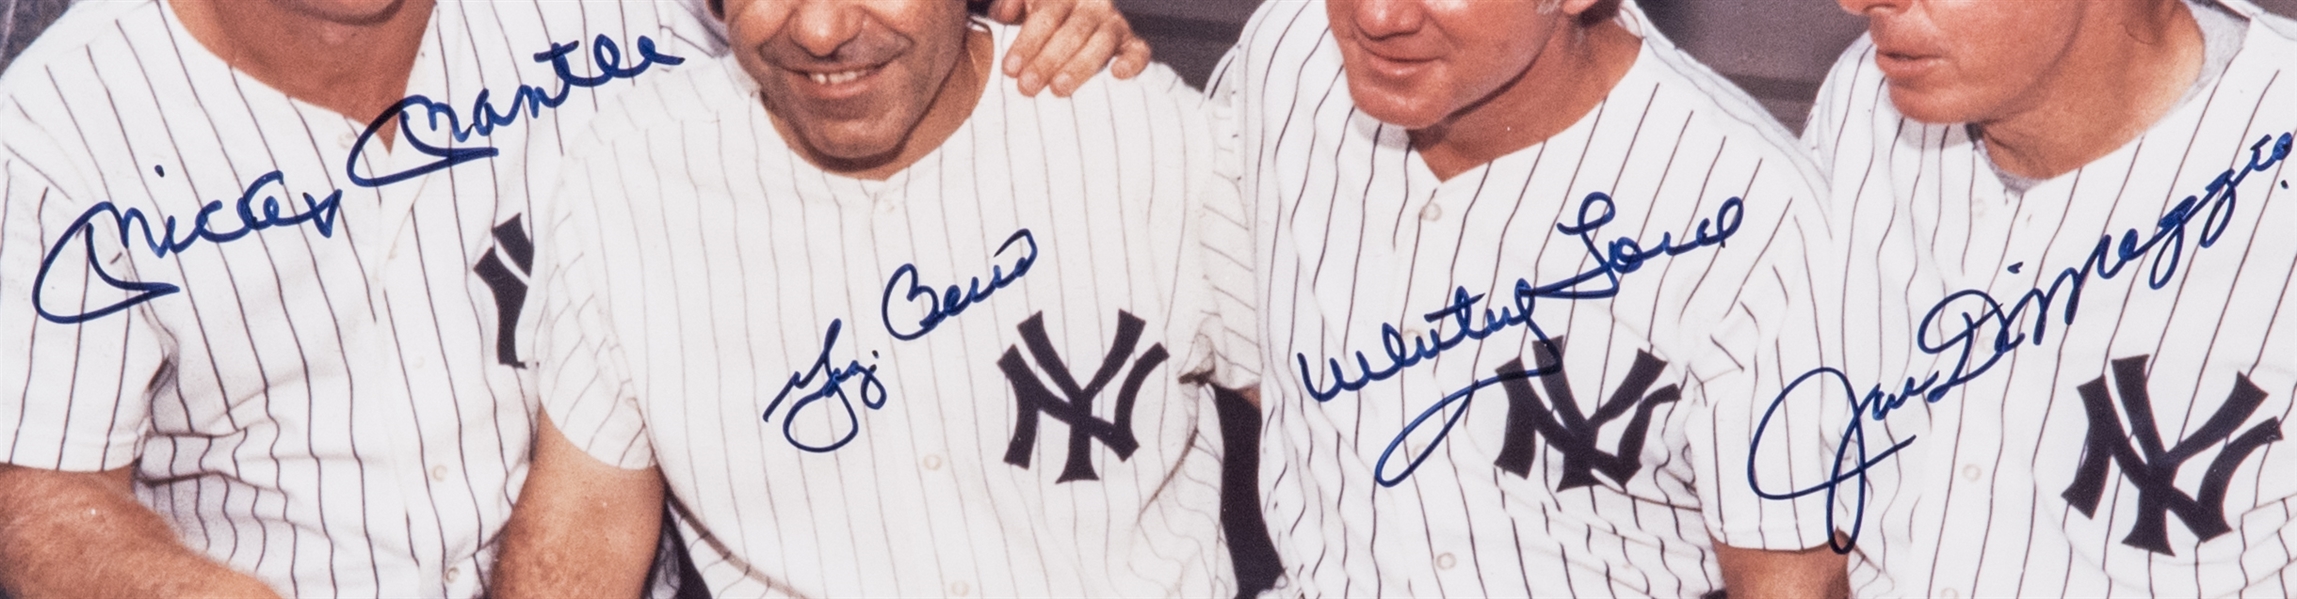 New York Yankees Legends Autographed 8x10 Photo With 4 Signatures Including  Mickey Mantle & Joe DiMaggio PSA/DNA #W00040